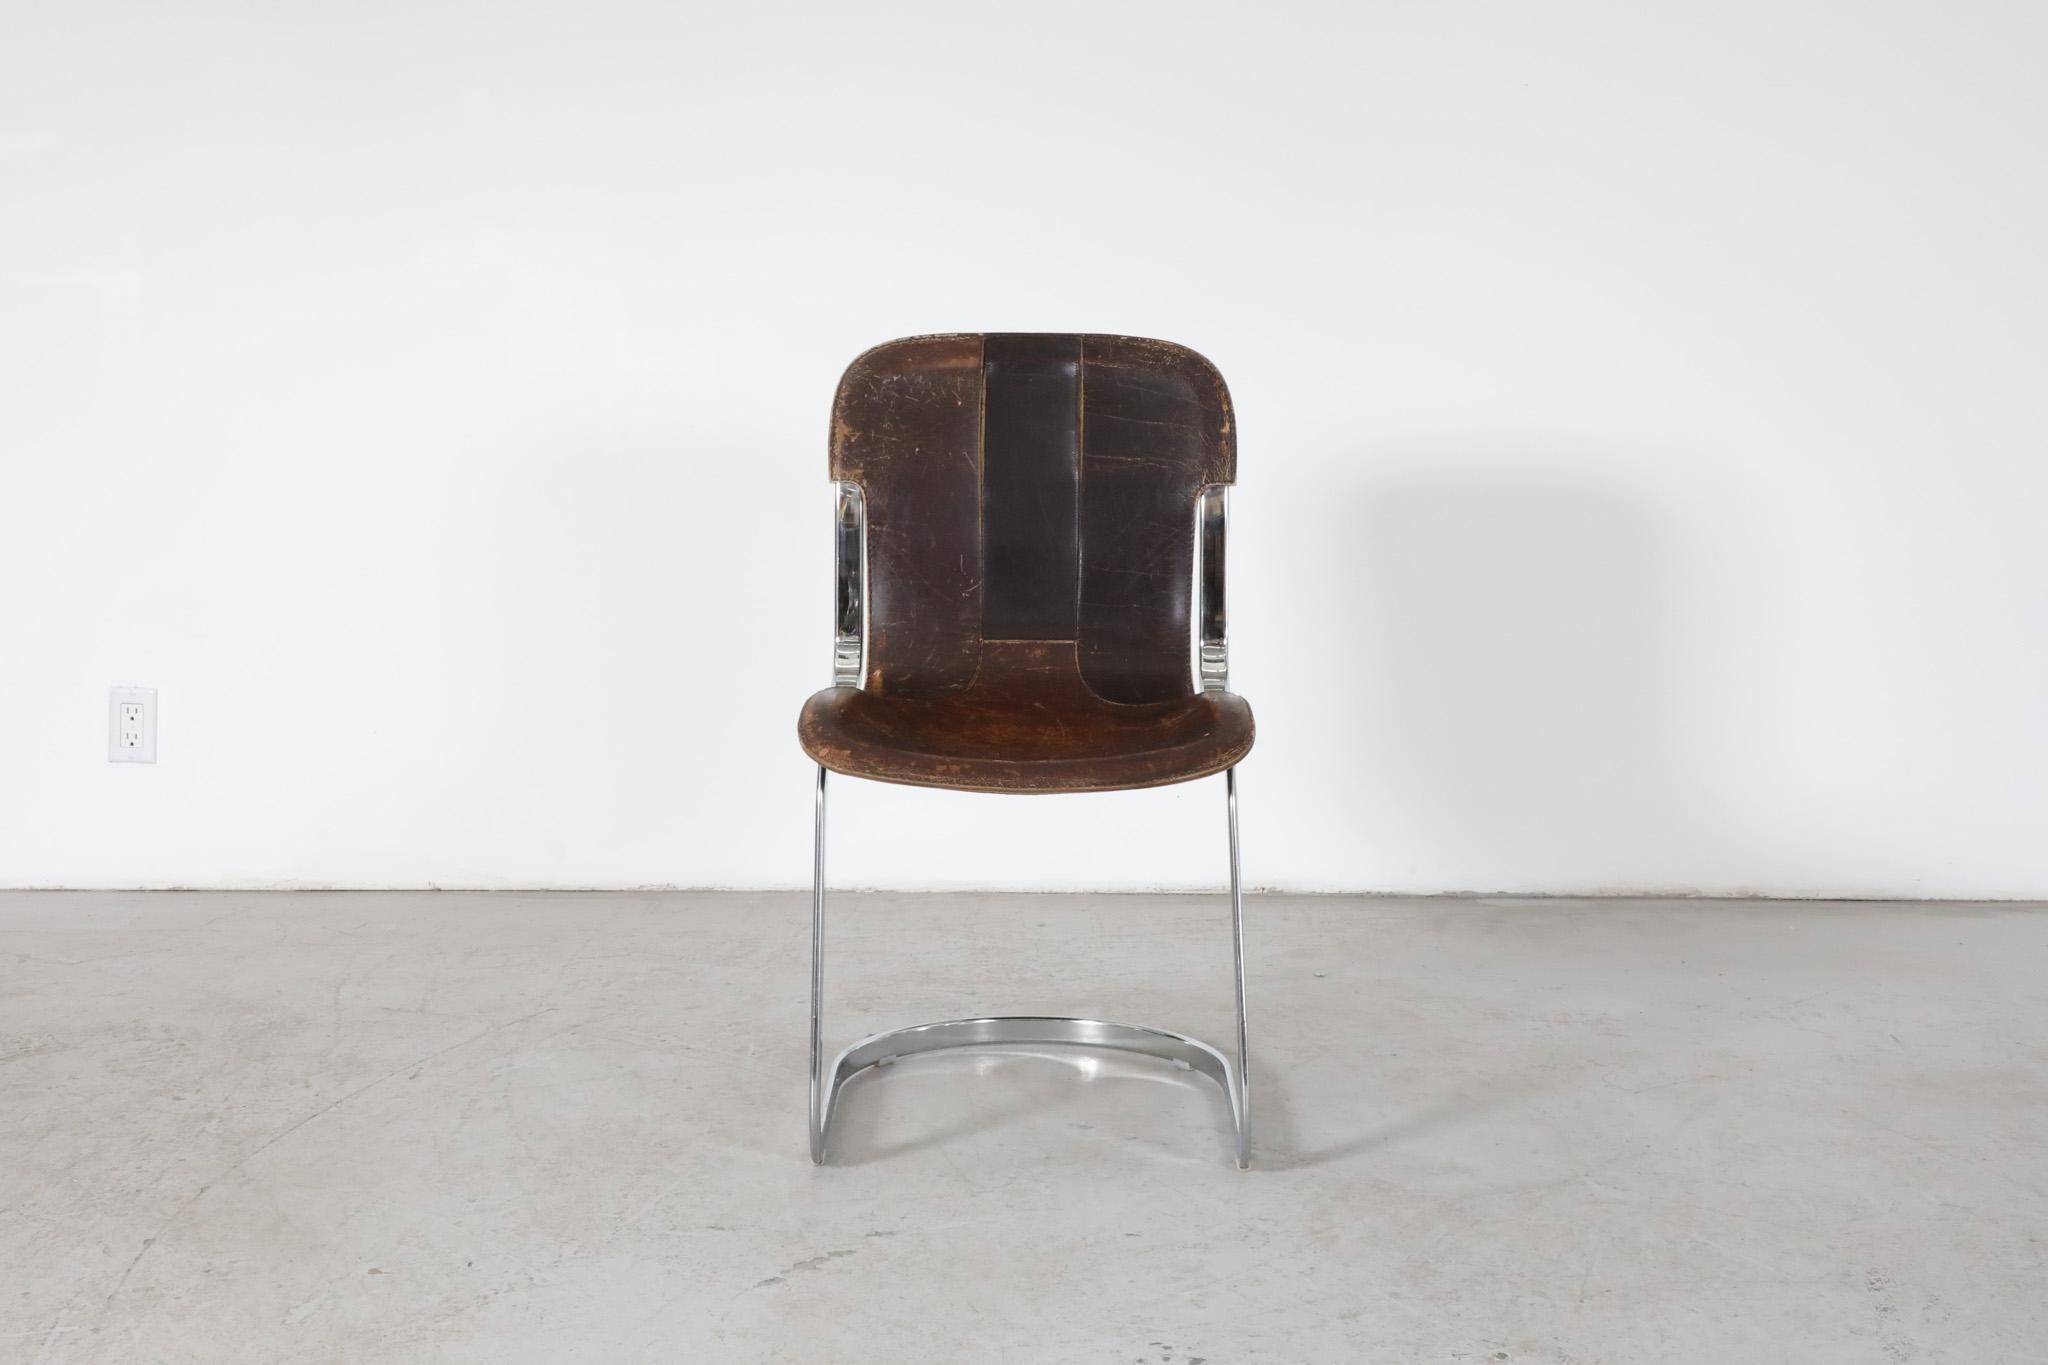 Mid-Century steel and leather chair by designer Willy Rizzo for Italian design house Cidue. In original condition with visible wear and heavy patina, consistent with its age and use. Original foot inserts were replaced with felt pads. Matching set